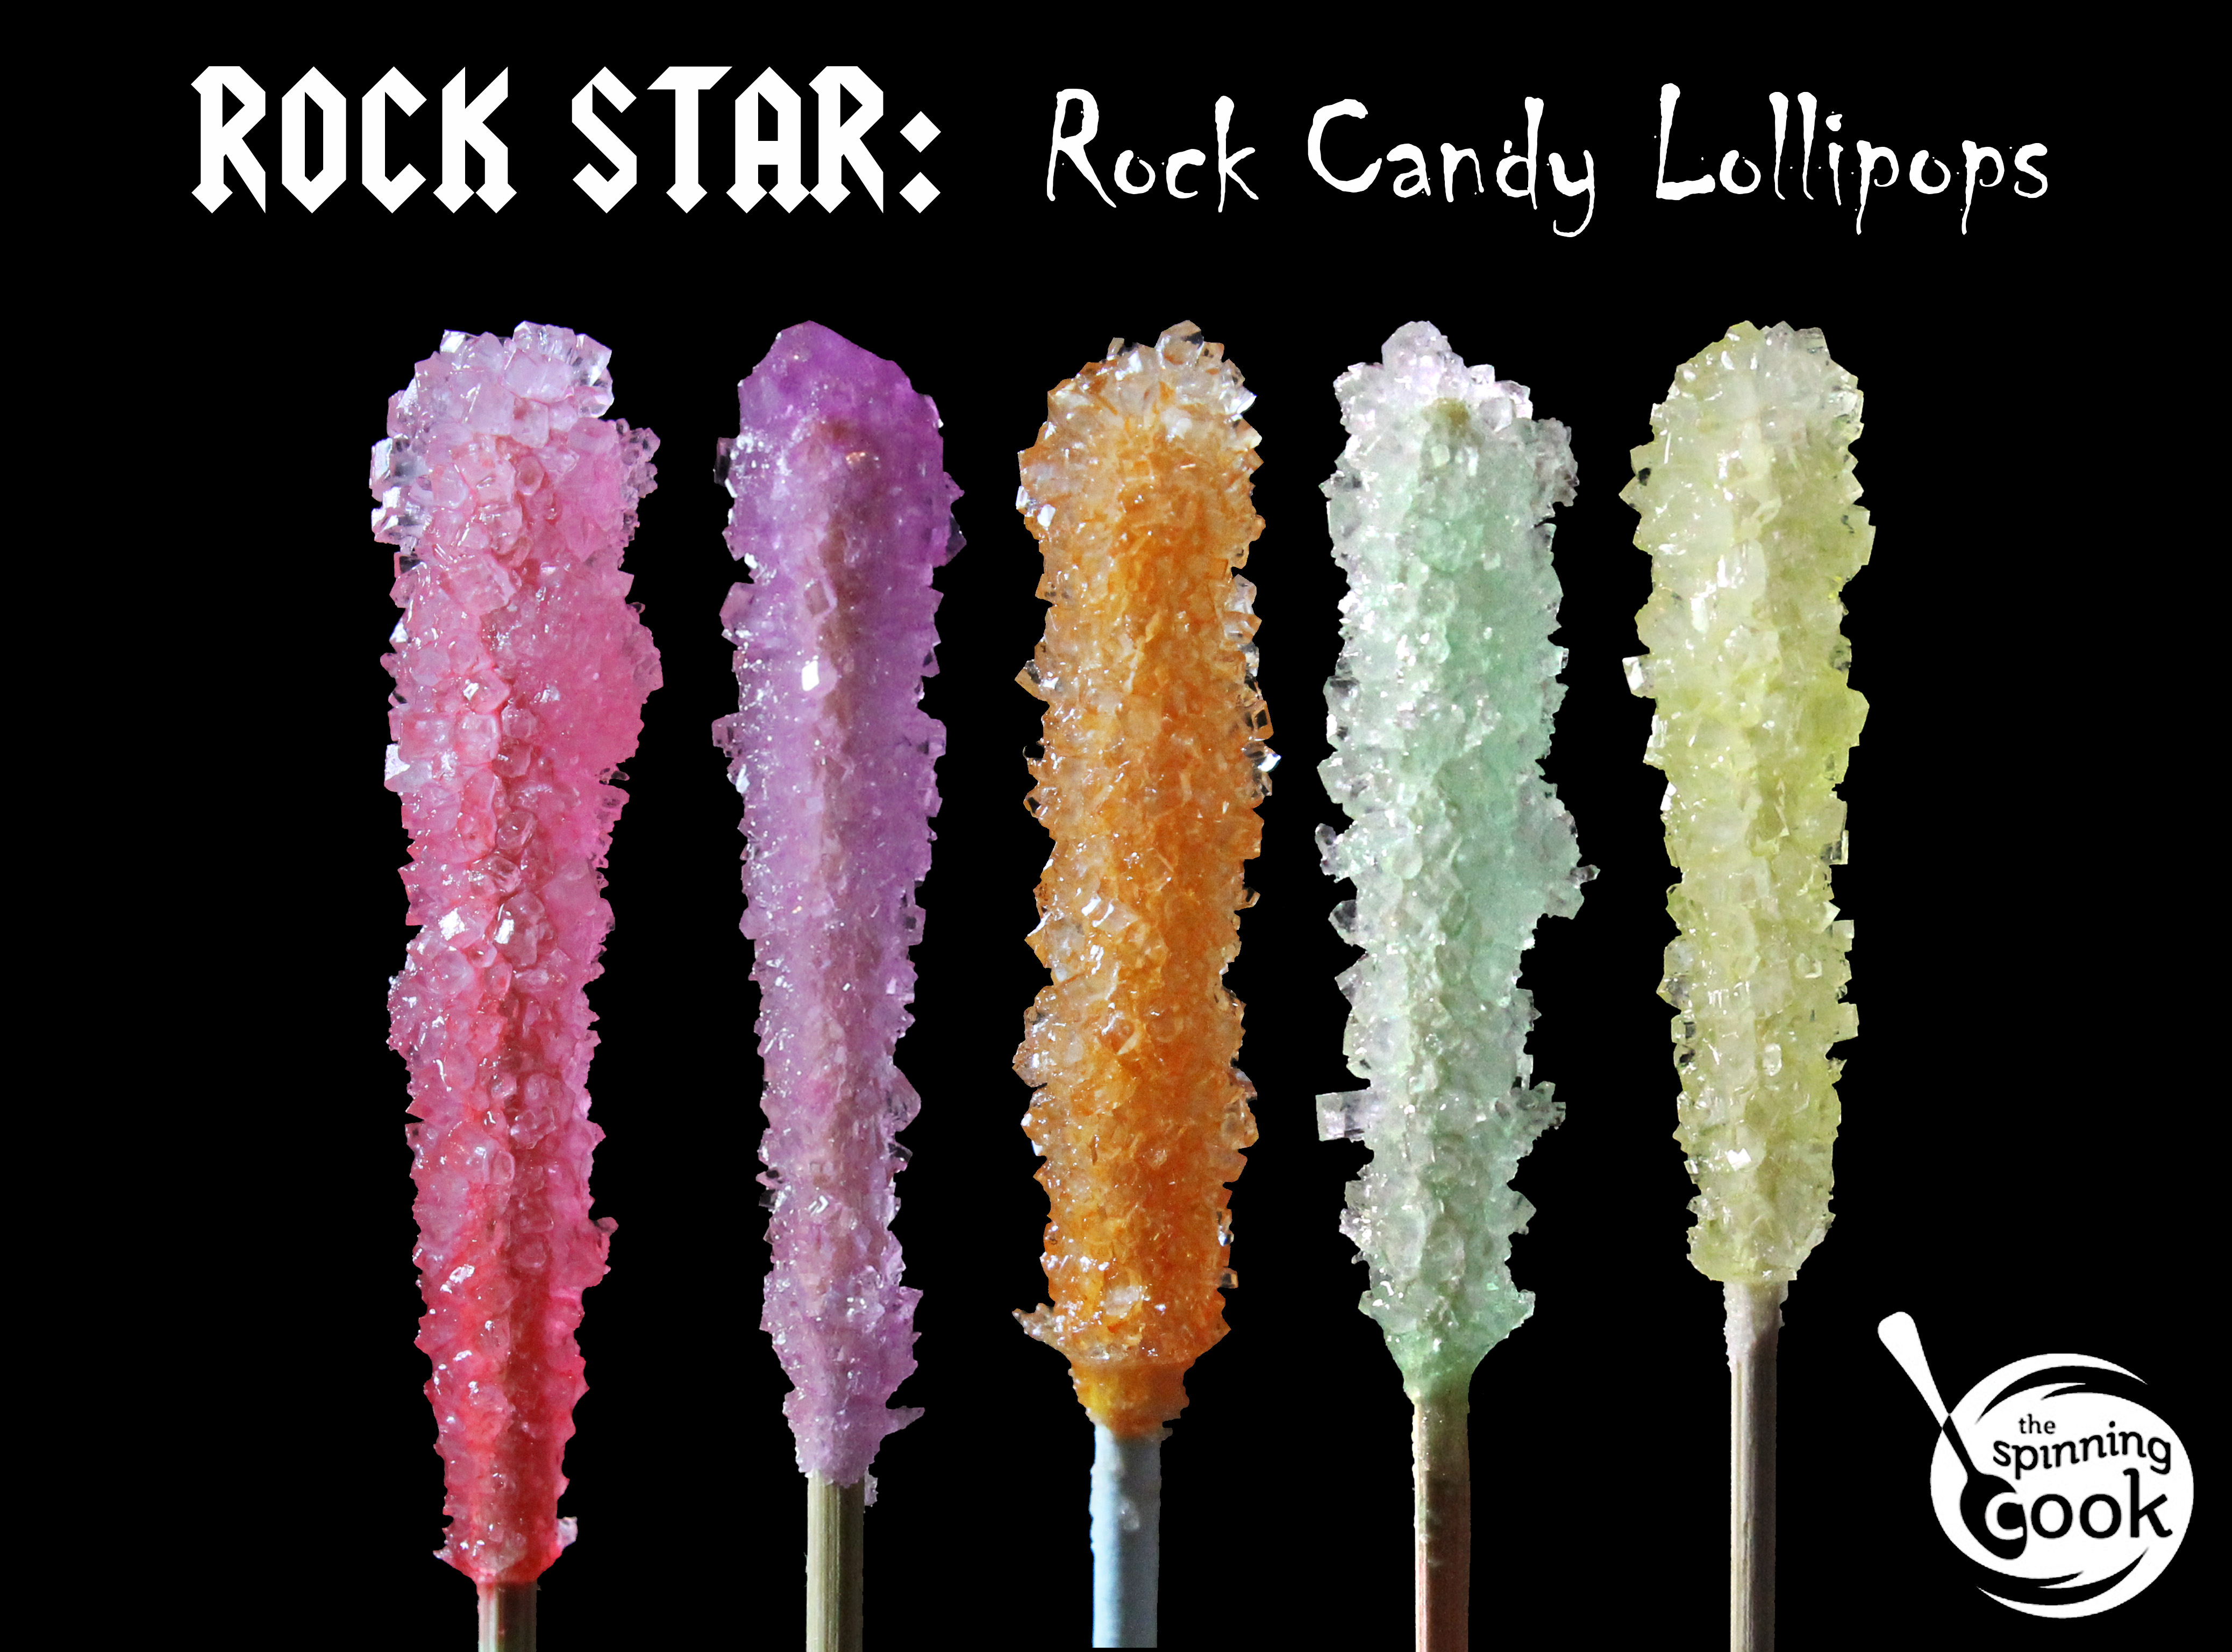 Rock Candy Lollipops Recipe - Spinning Cook